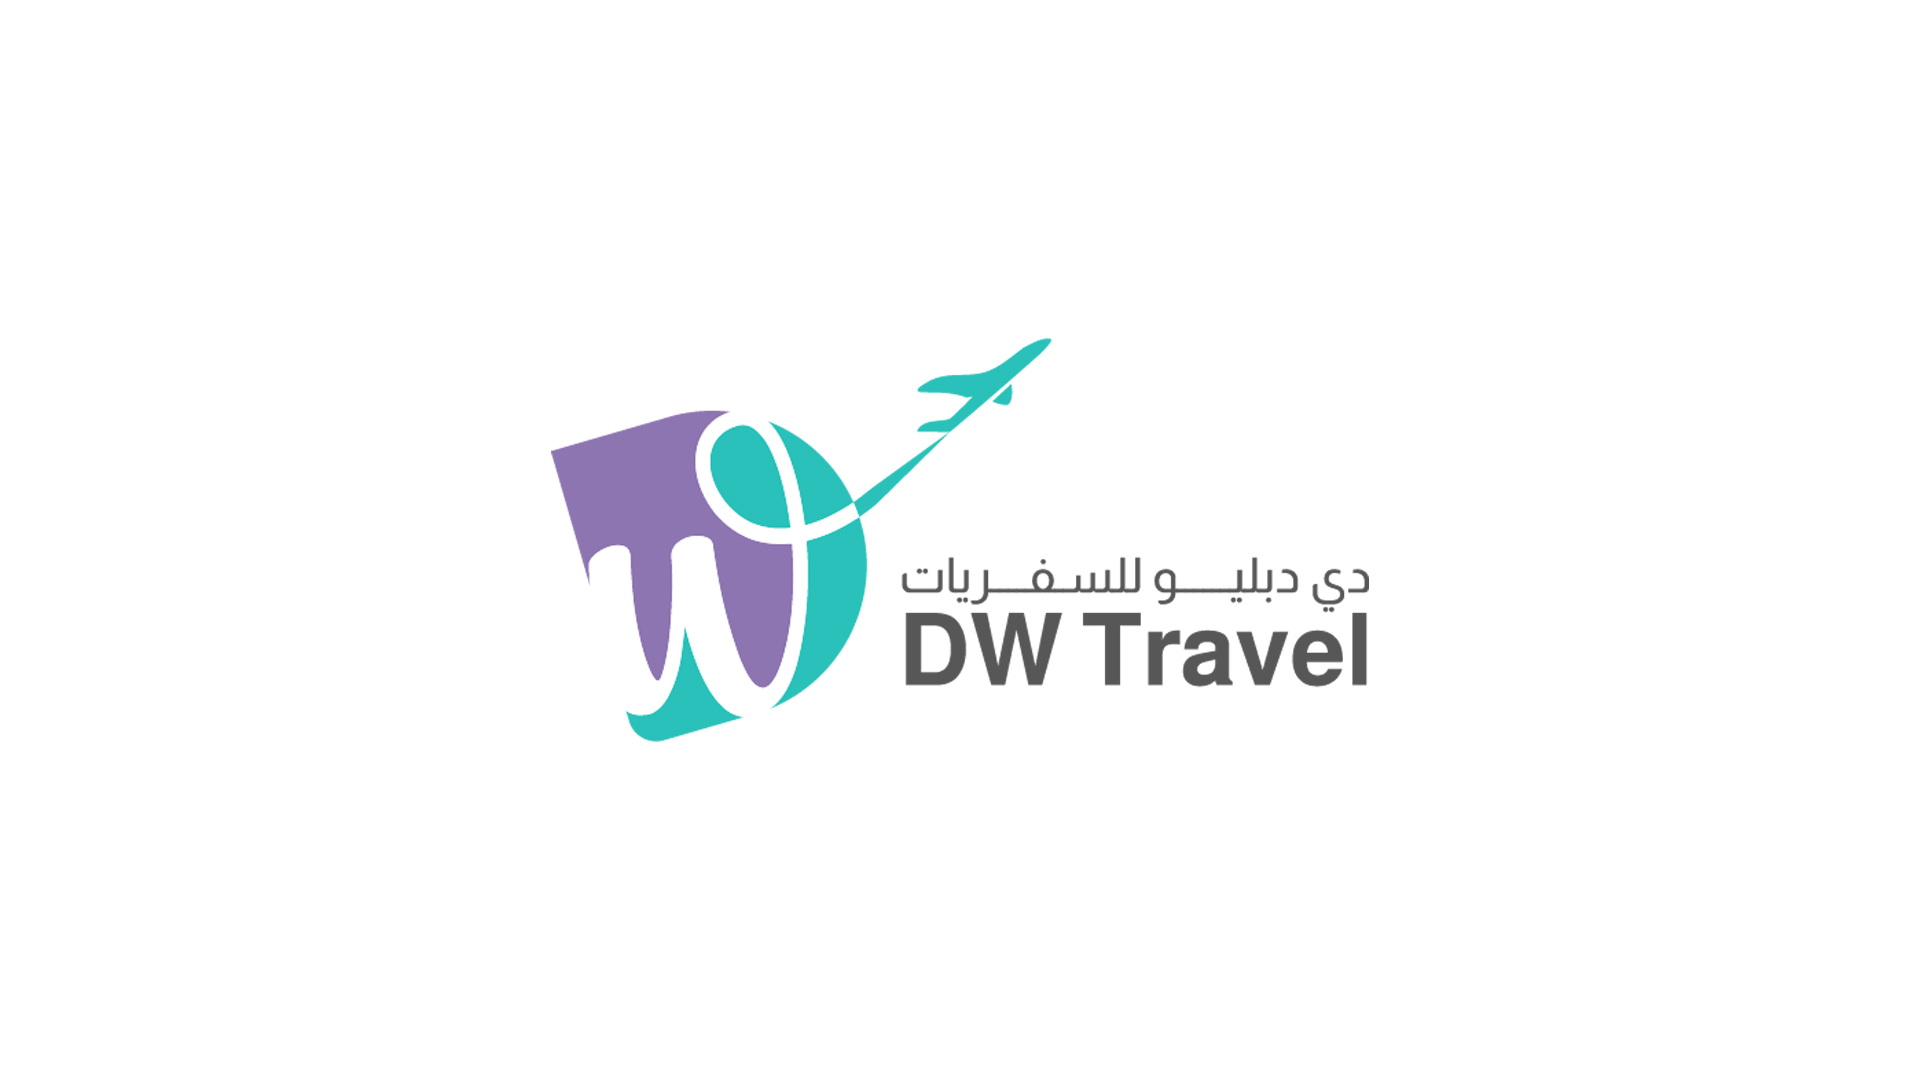 DW Travel launches its New Brand Ide...